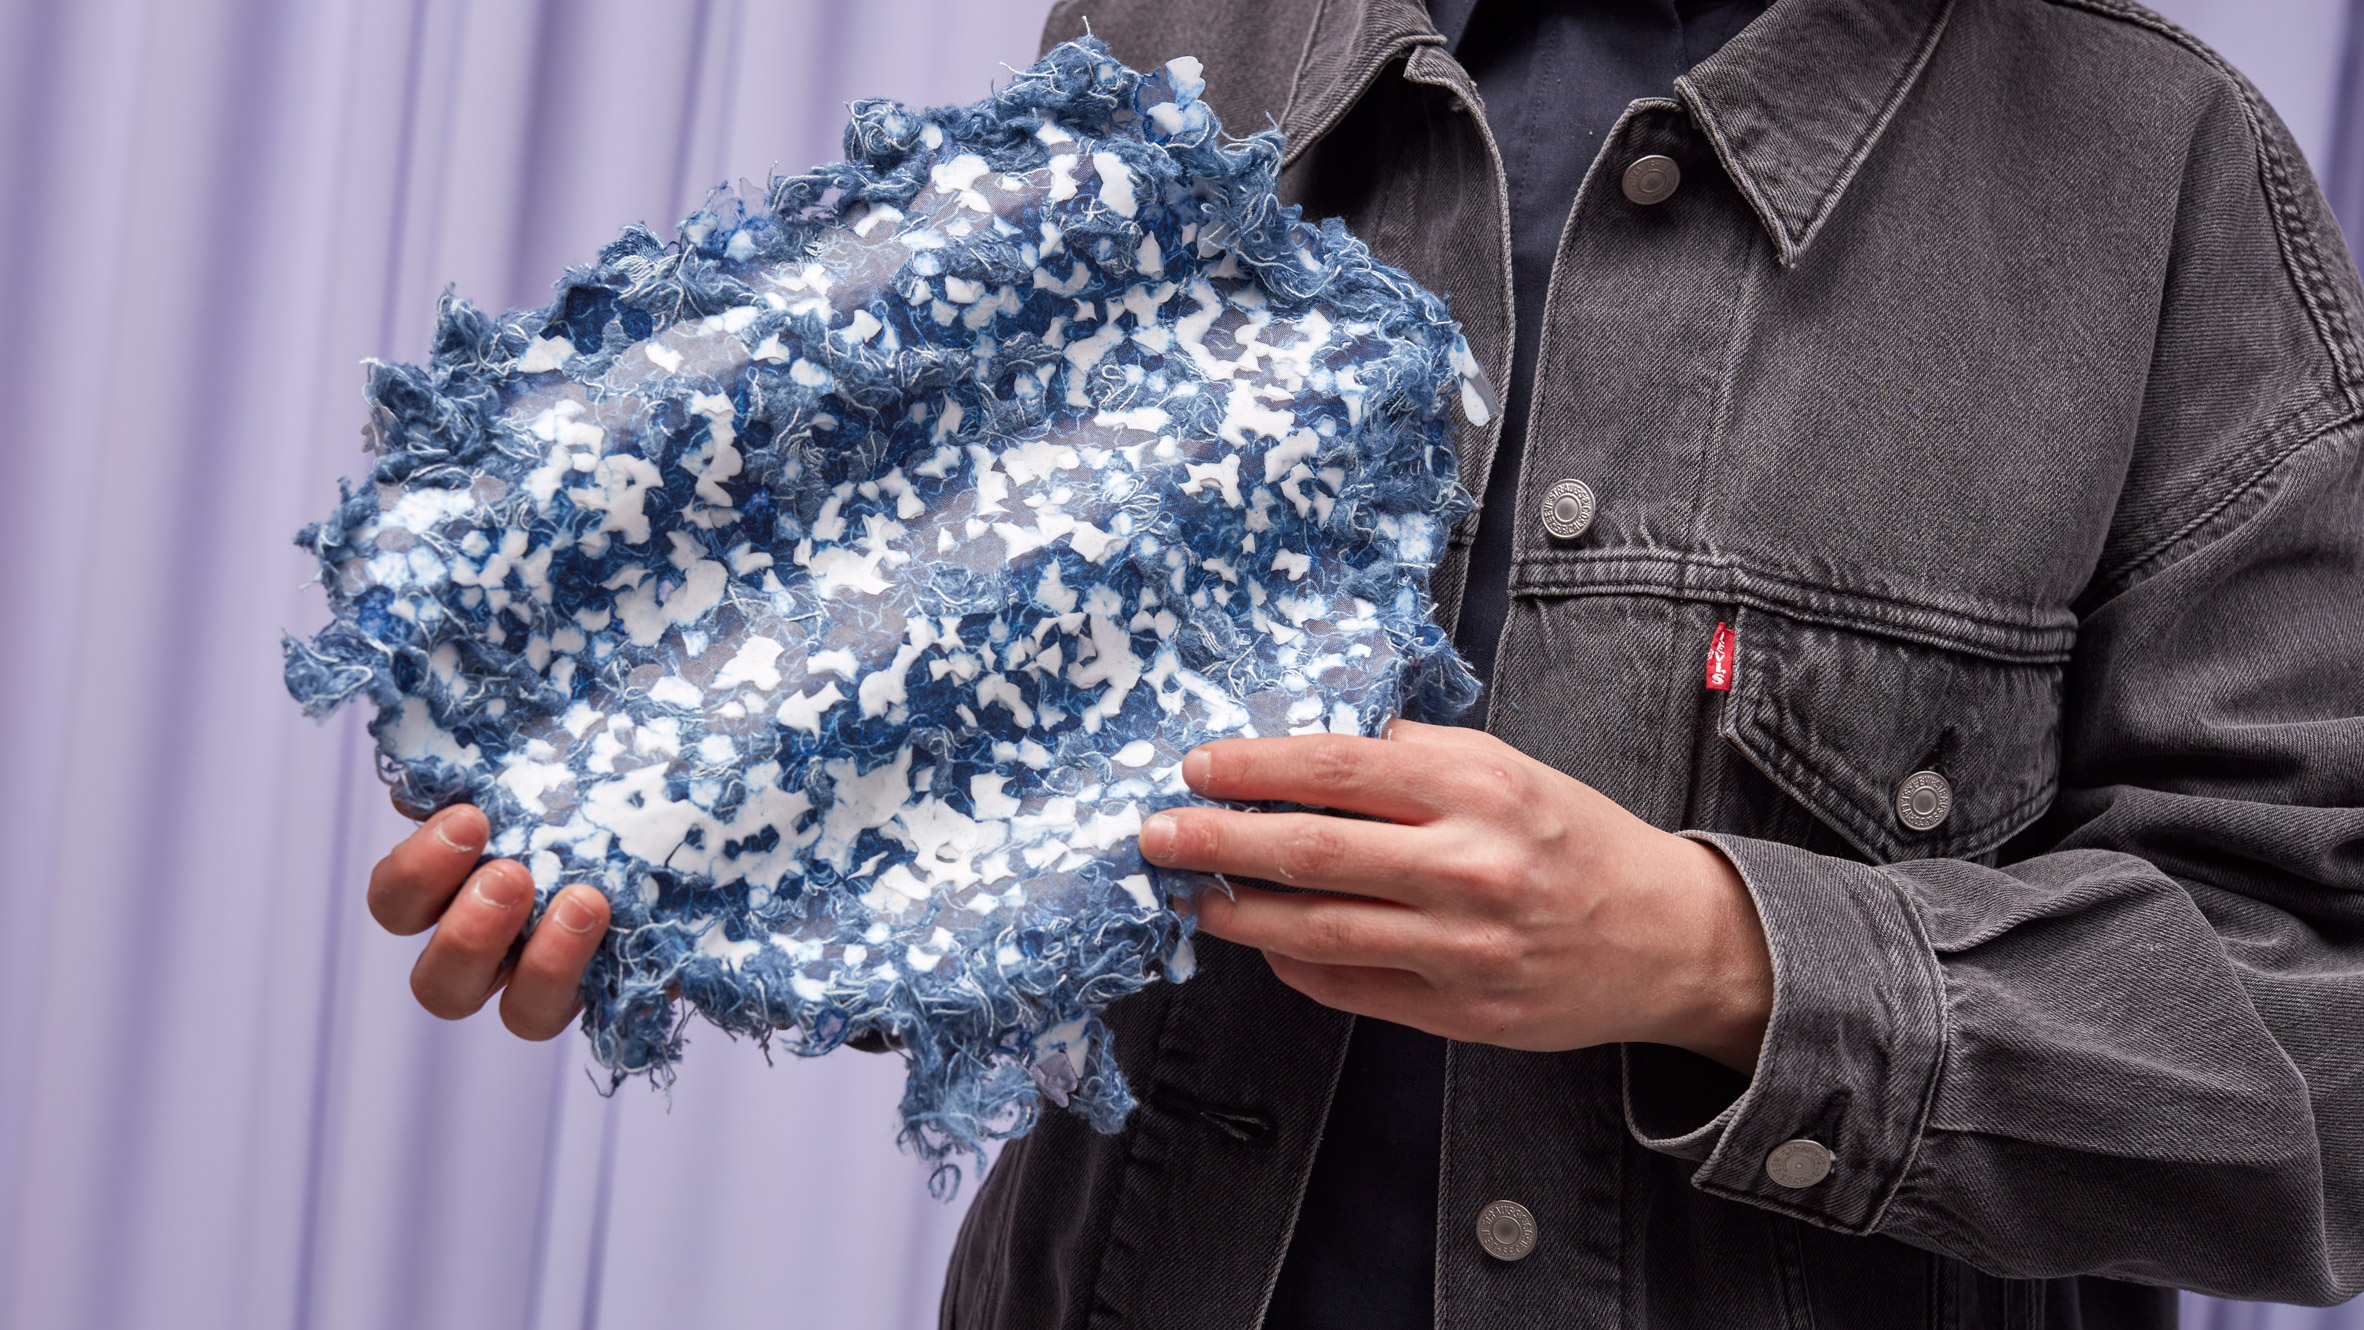 Designers invent new materials made from old jeans for Levi's